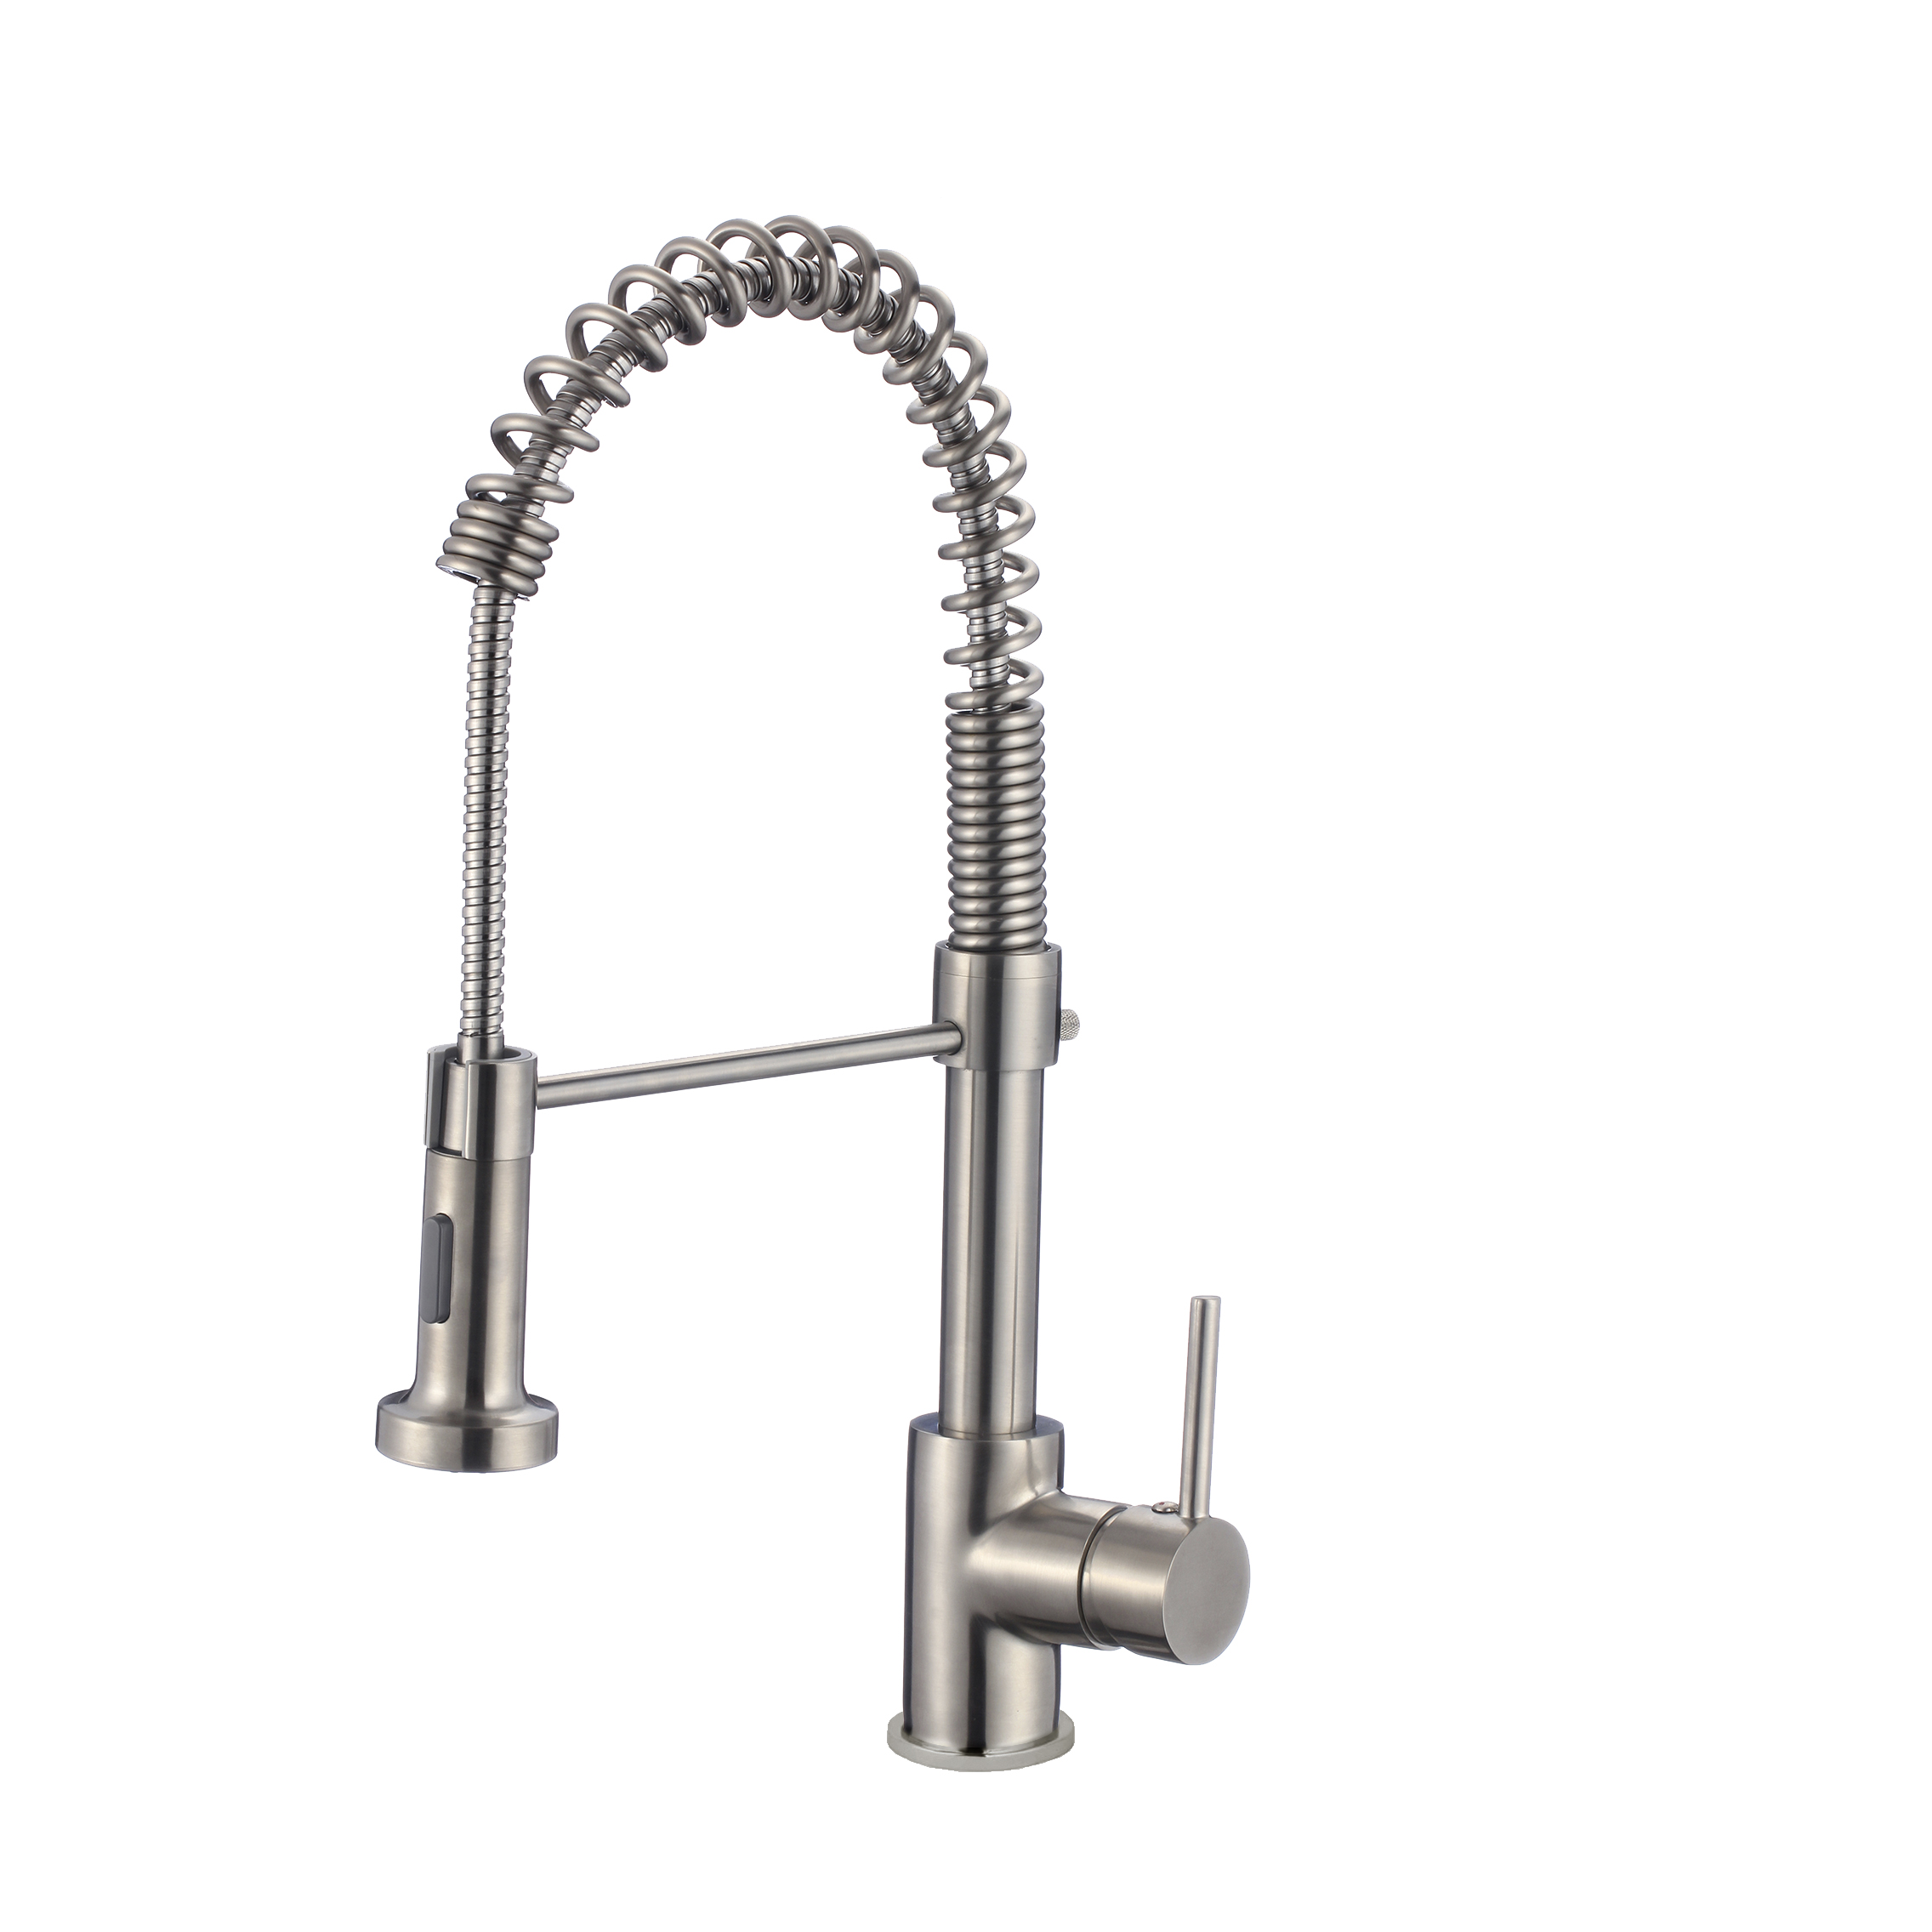 STYLISH Kitchen Sink Faucet Dual Mode Lead Free Brushed Nickel Finish